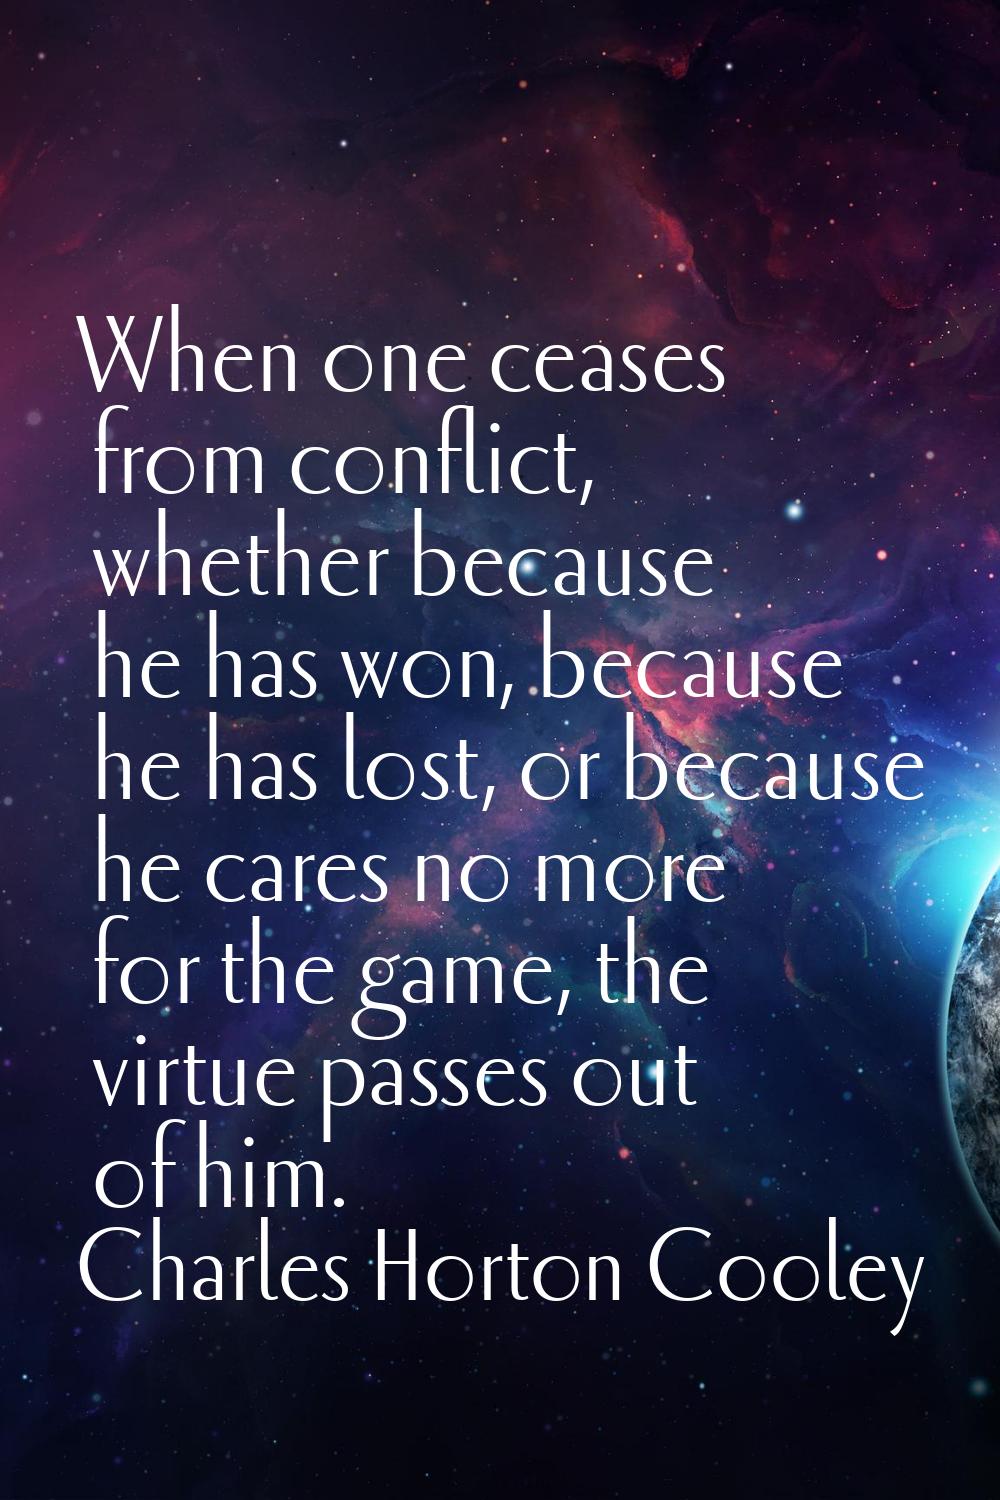 When one ceases from conflict, whether because he has won, because he has lost, or because he cares